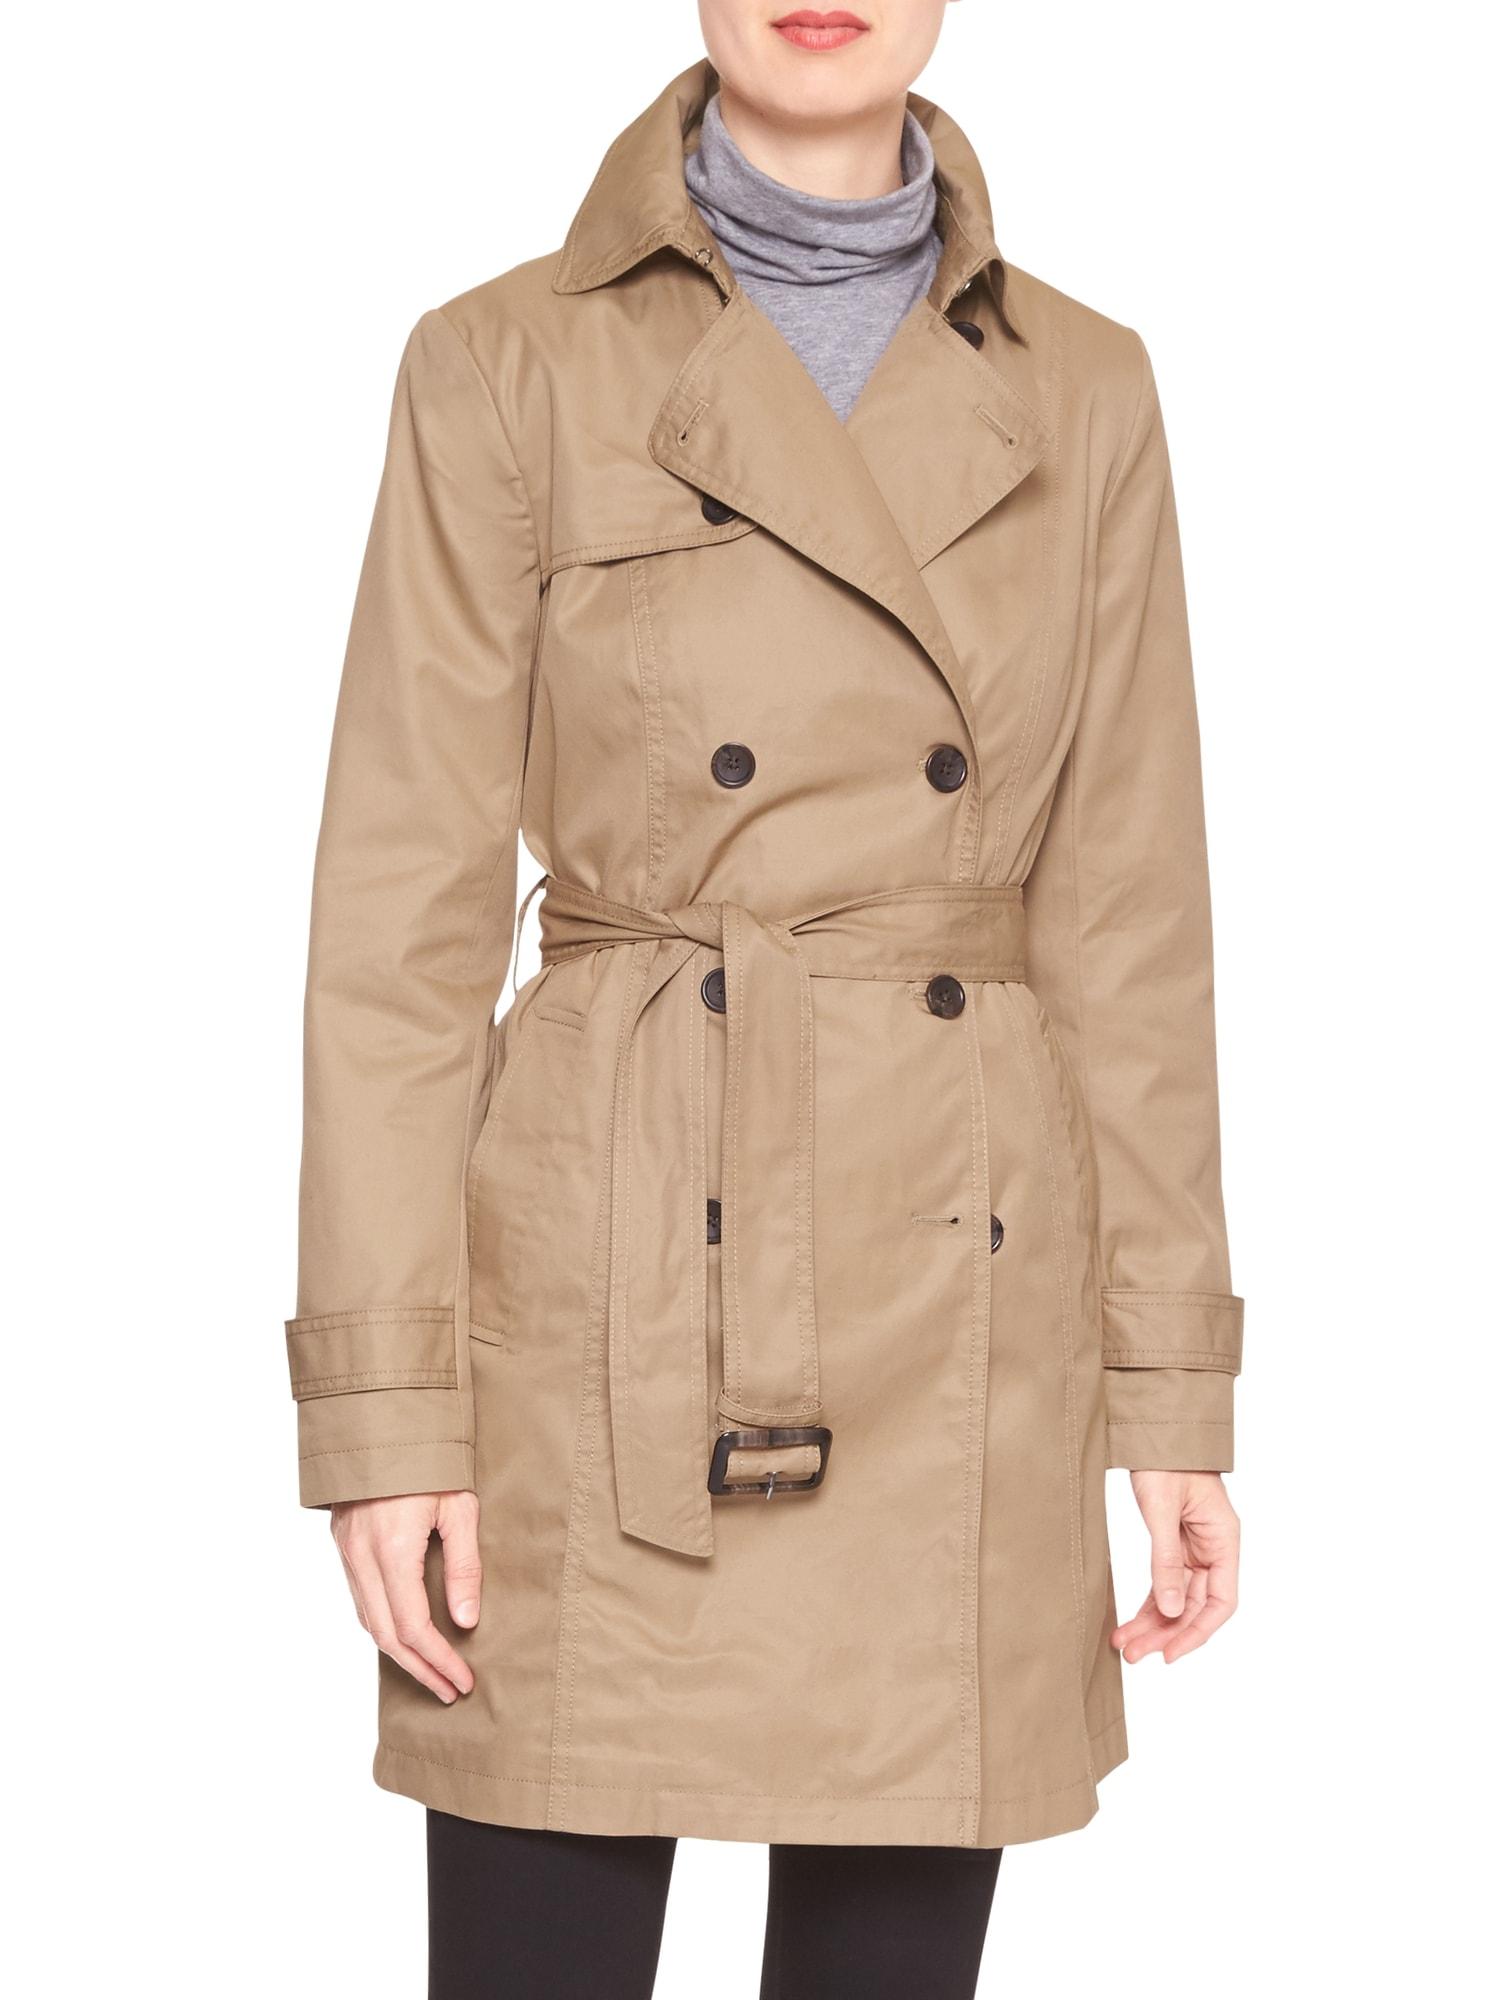 Banana Republic Factory Cotton Petite Classic Trench Coat in Natural | Lyst